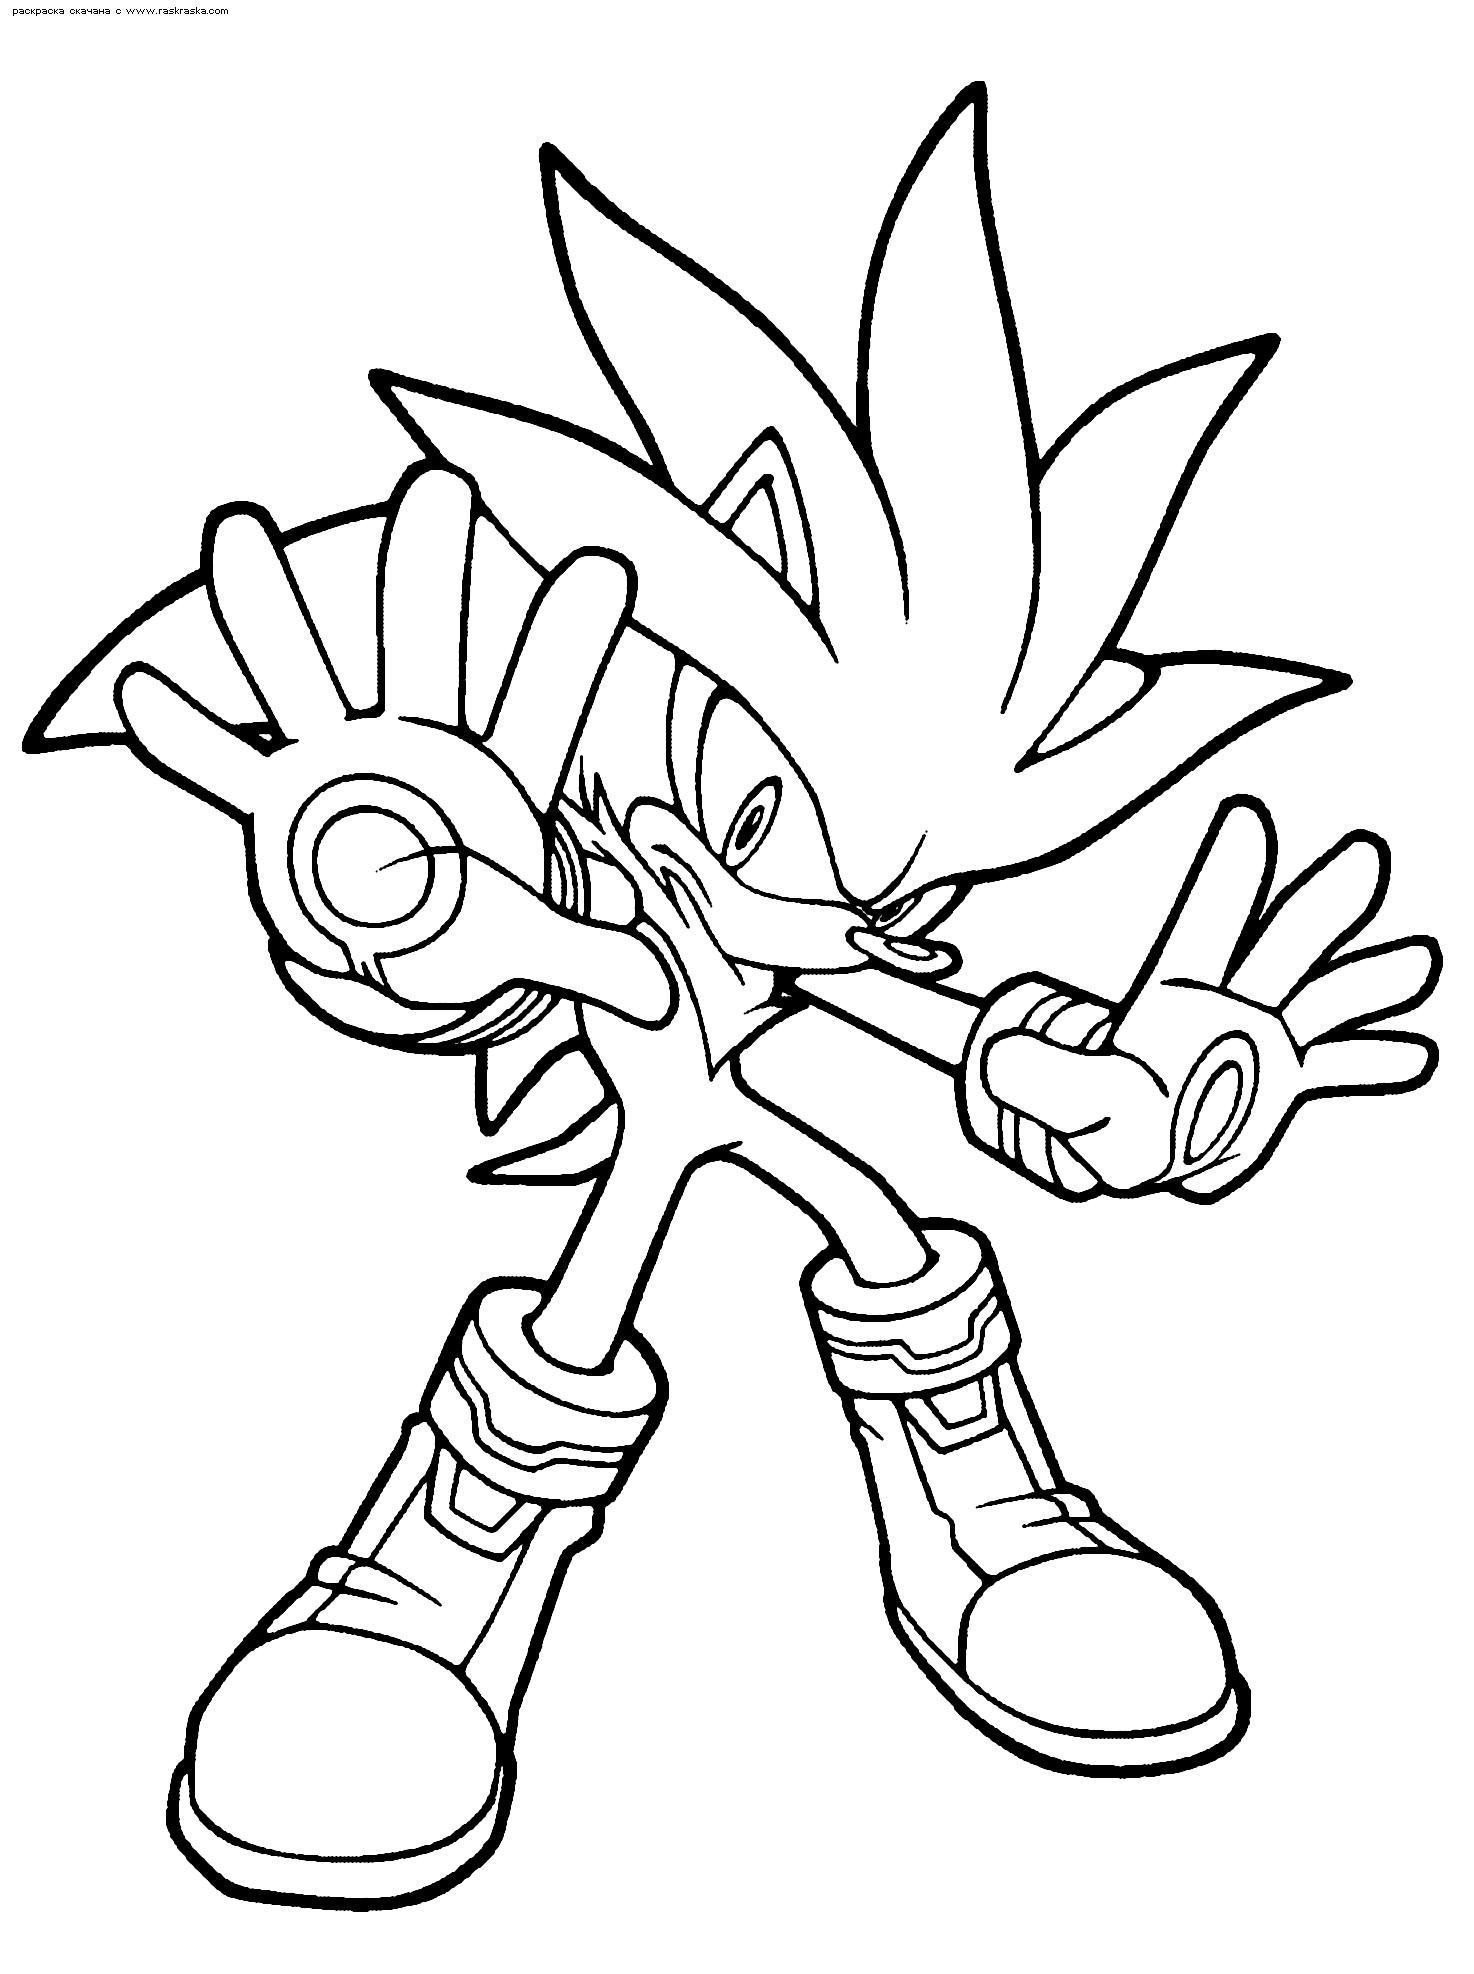 coloring pages : Sonic And Friends Coloring Pages New Sonic The Hedgehog  Worksheets Sonic and Friends Coloring Pages ~ affiliateprogrambook.com